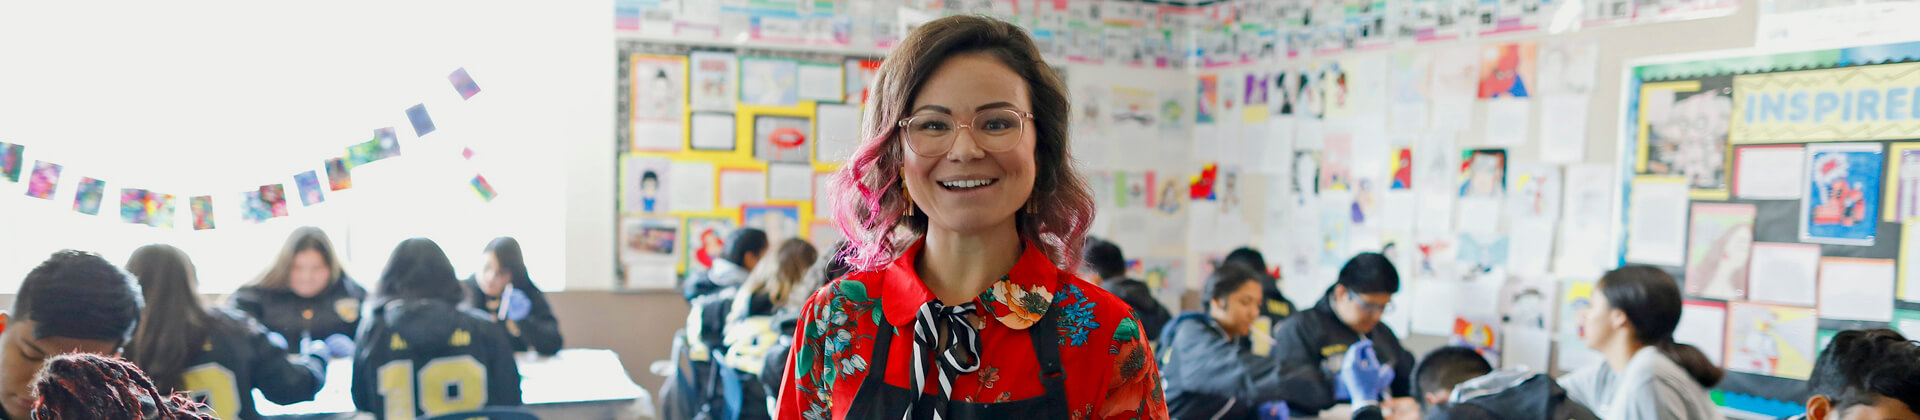 woman smiling at camera in classroom of adolescent students in background